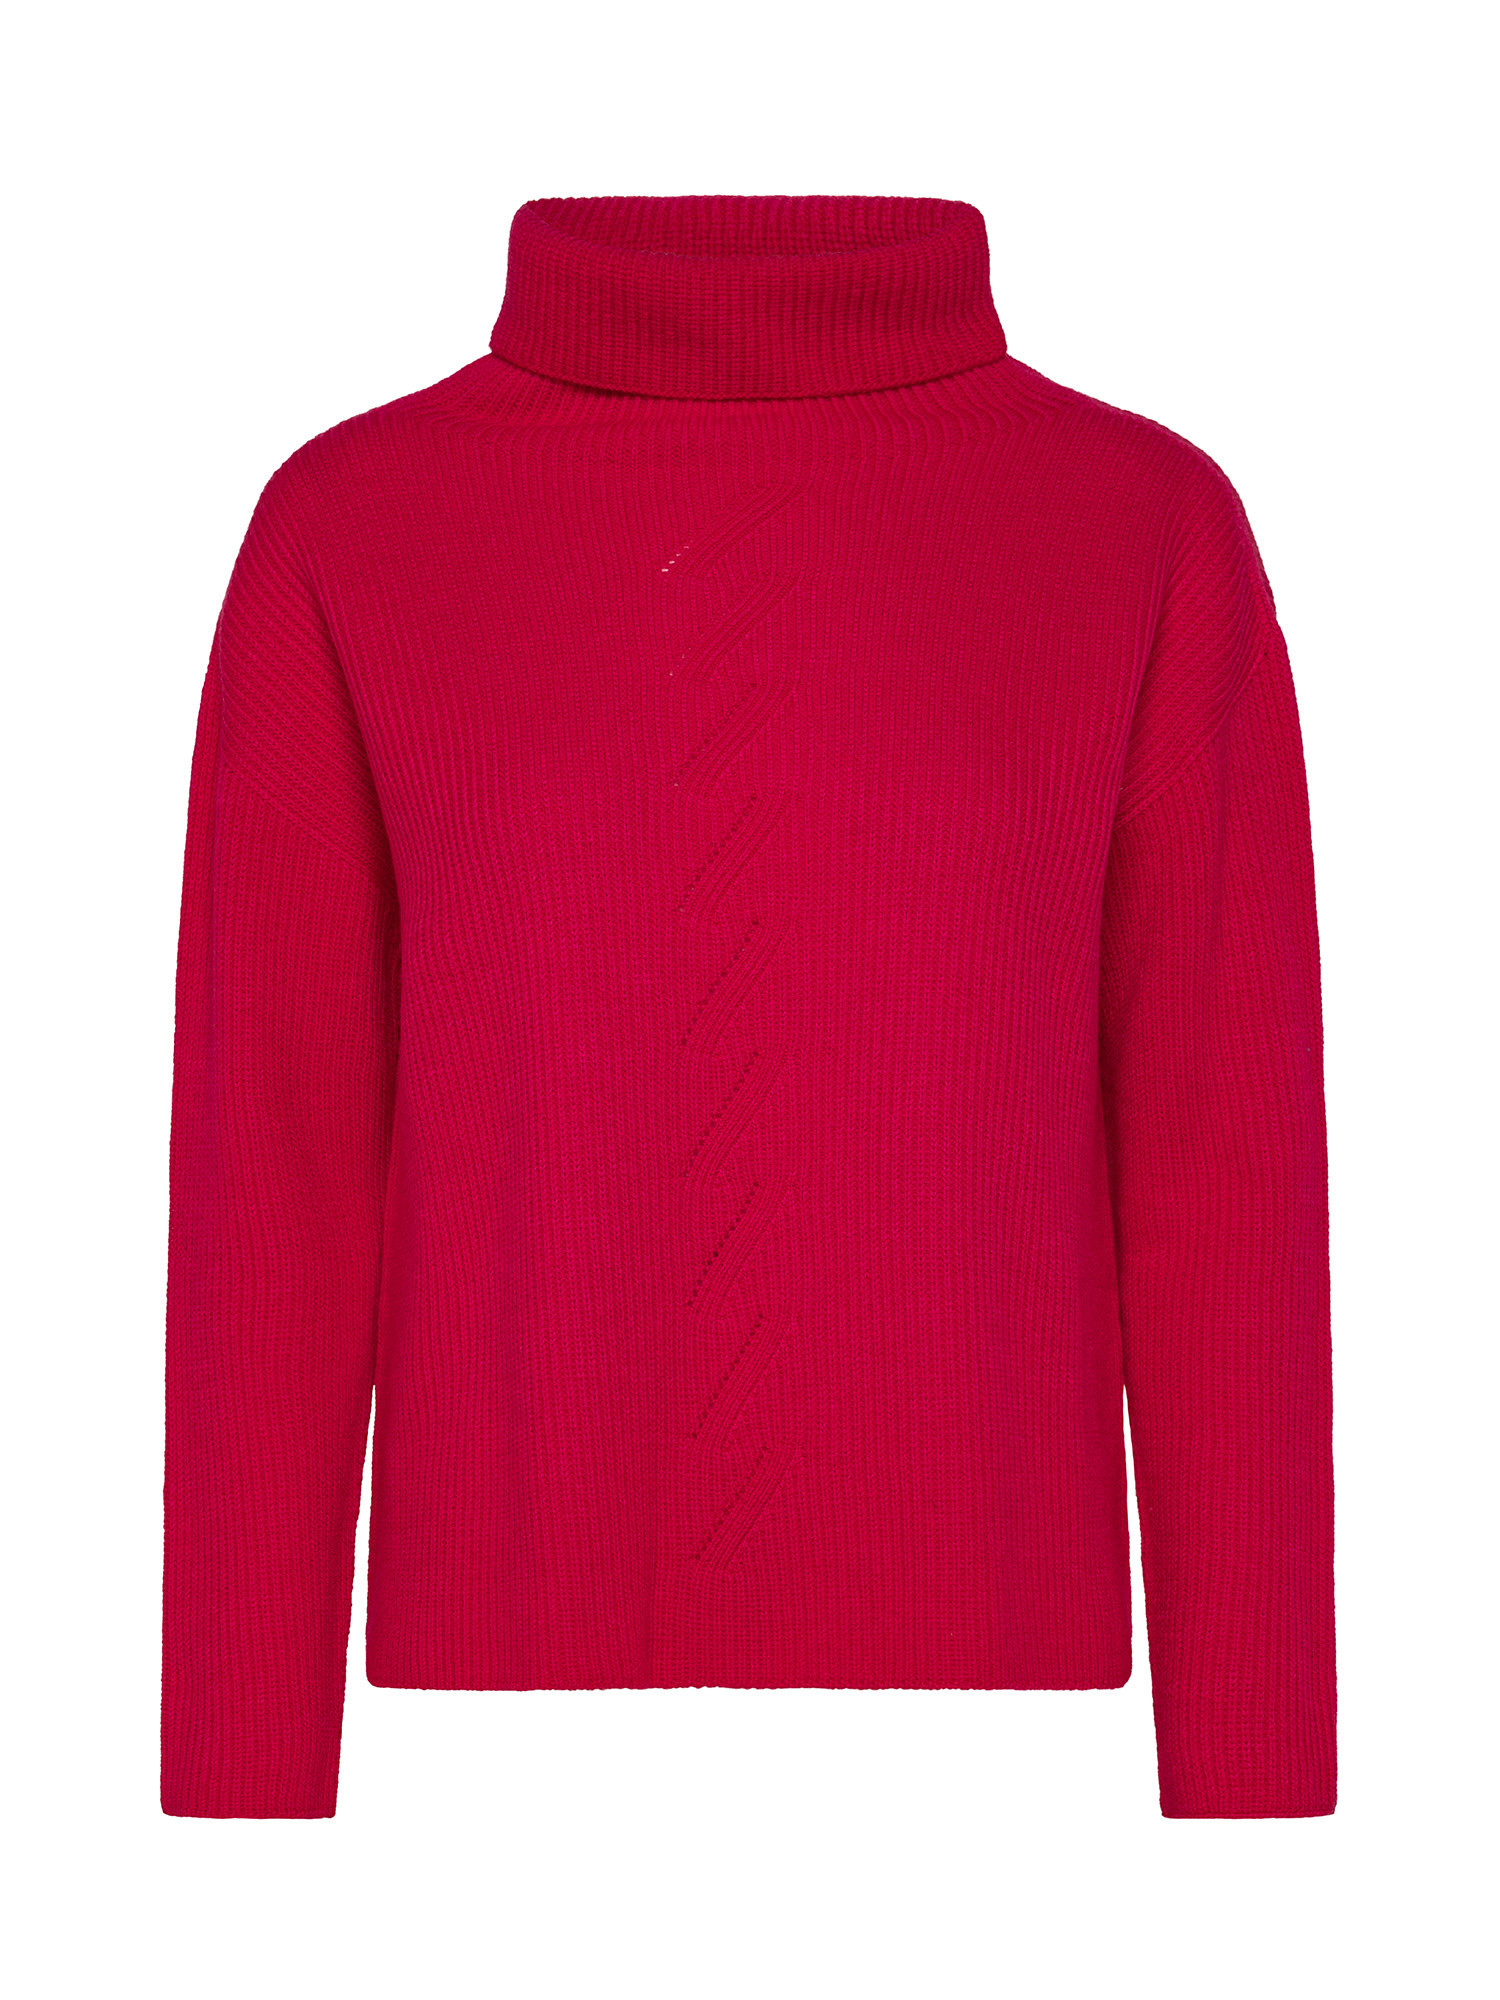 K Collection - Pullover dolcevita in lana extrafine, Rosa fuxia, large image number 0